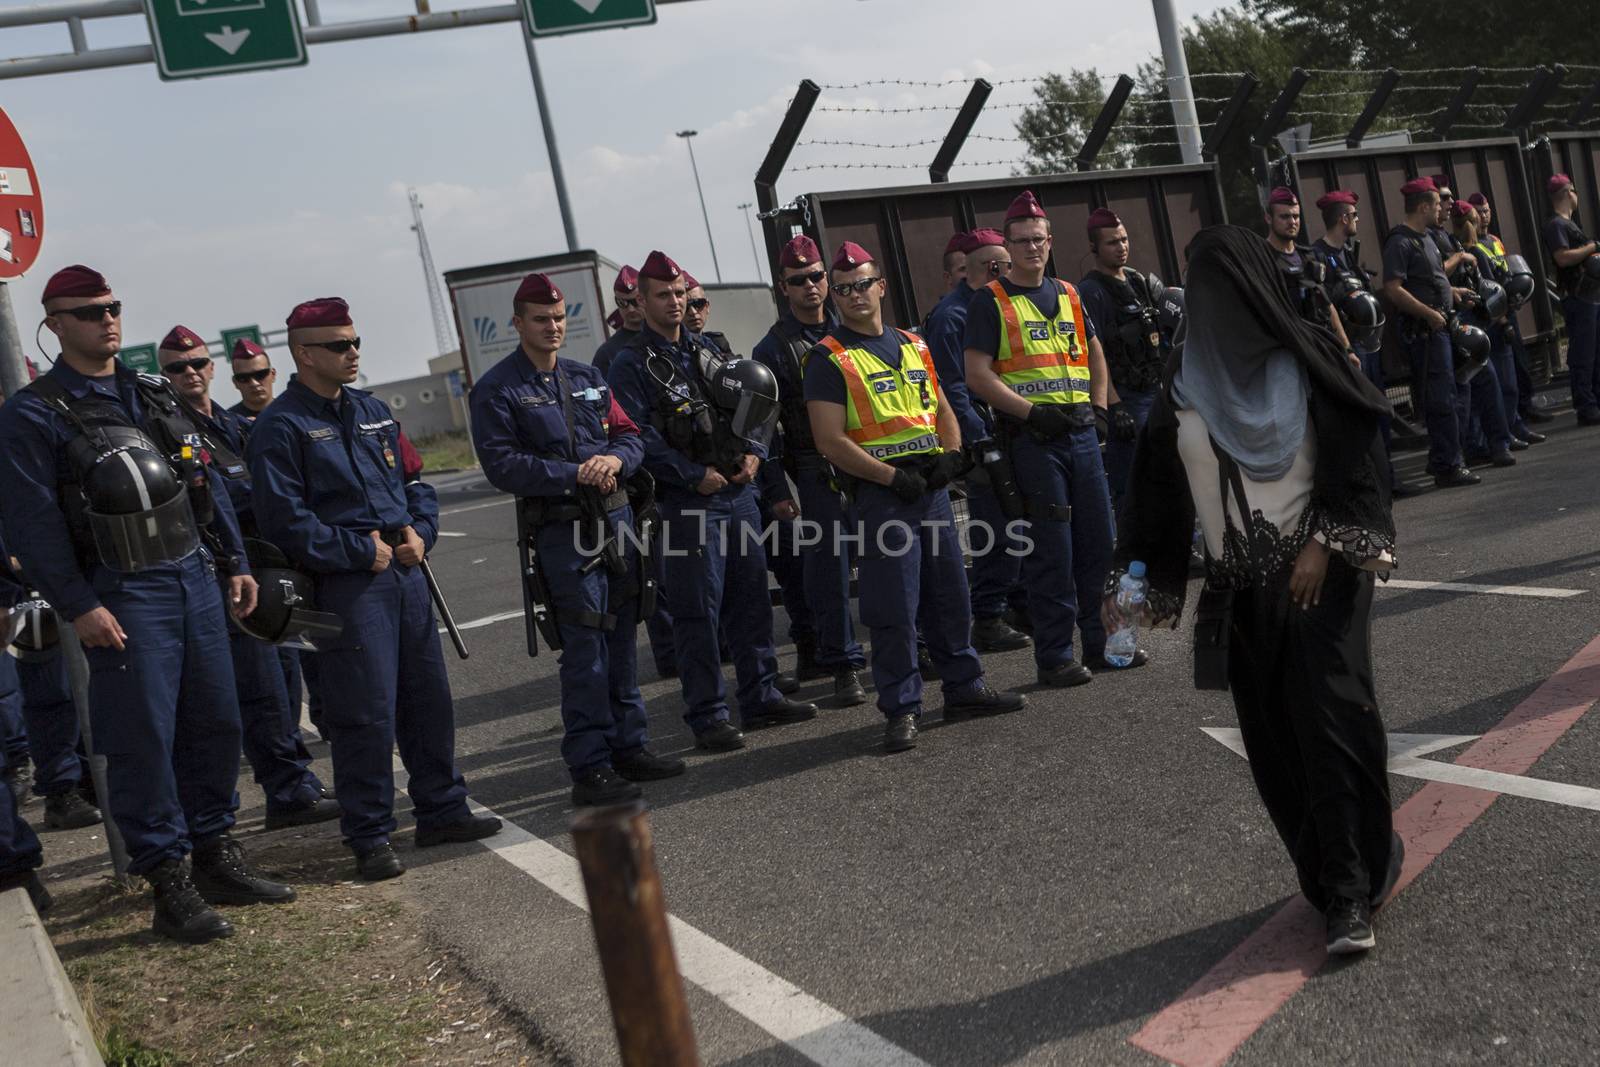 SERBIA, Horgos: A woman approaches Hungarian border guards at the Serbia-Hungary border after Hungary closed the border crossing on September 16, 2015.****Restriction: Photo is not to be sold in Russia or Asia****